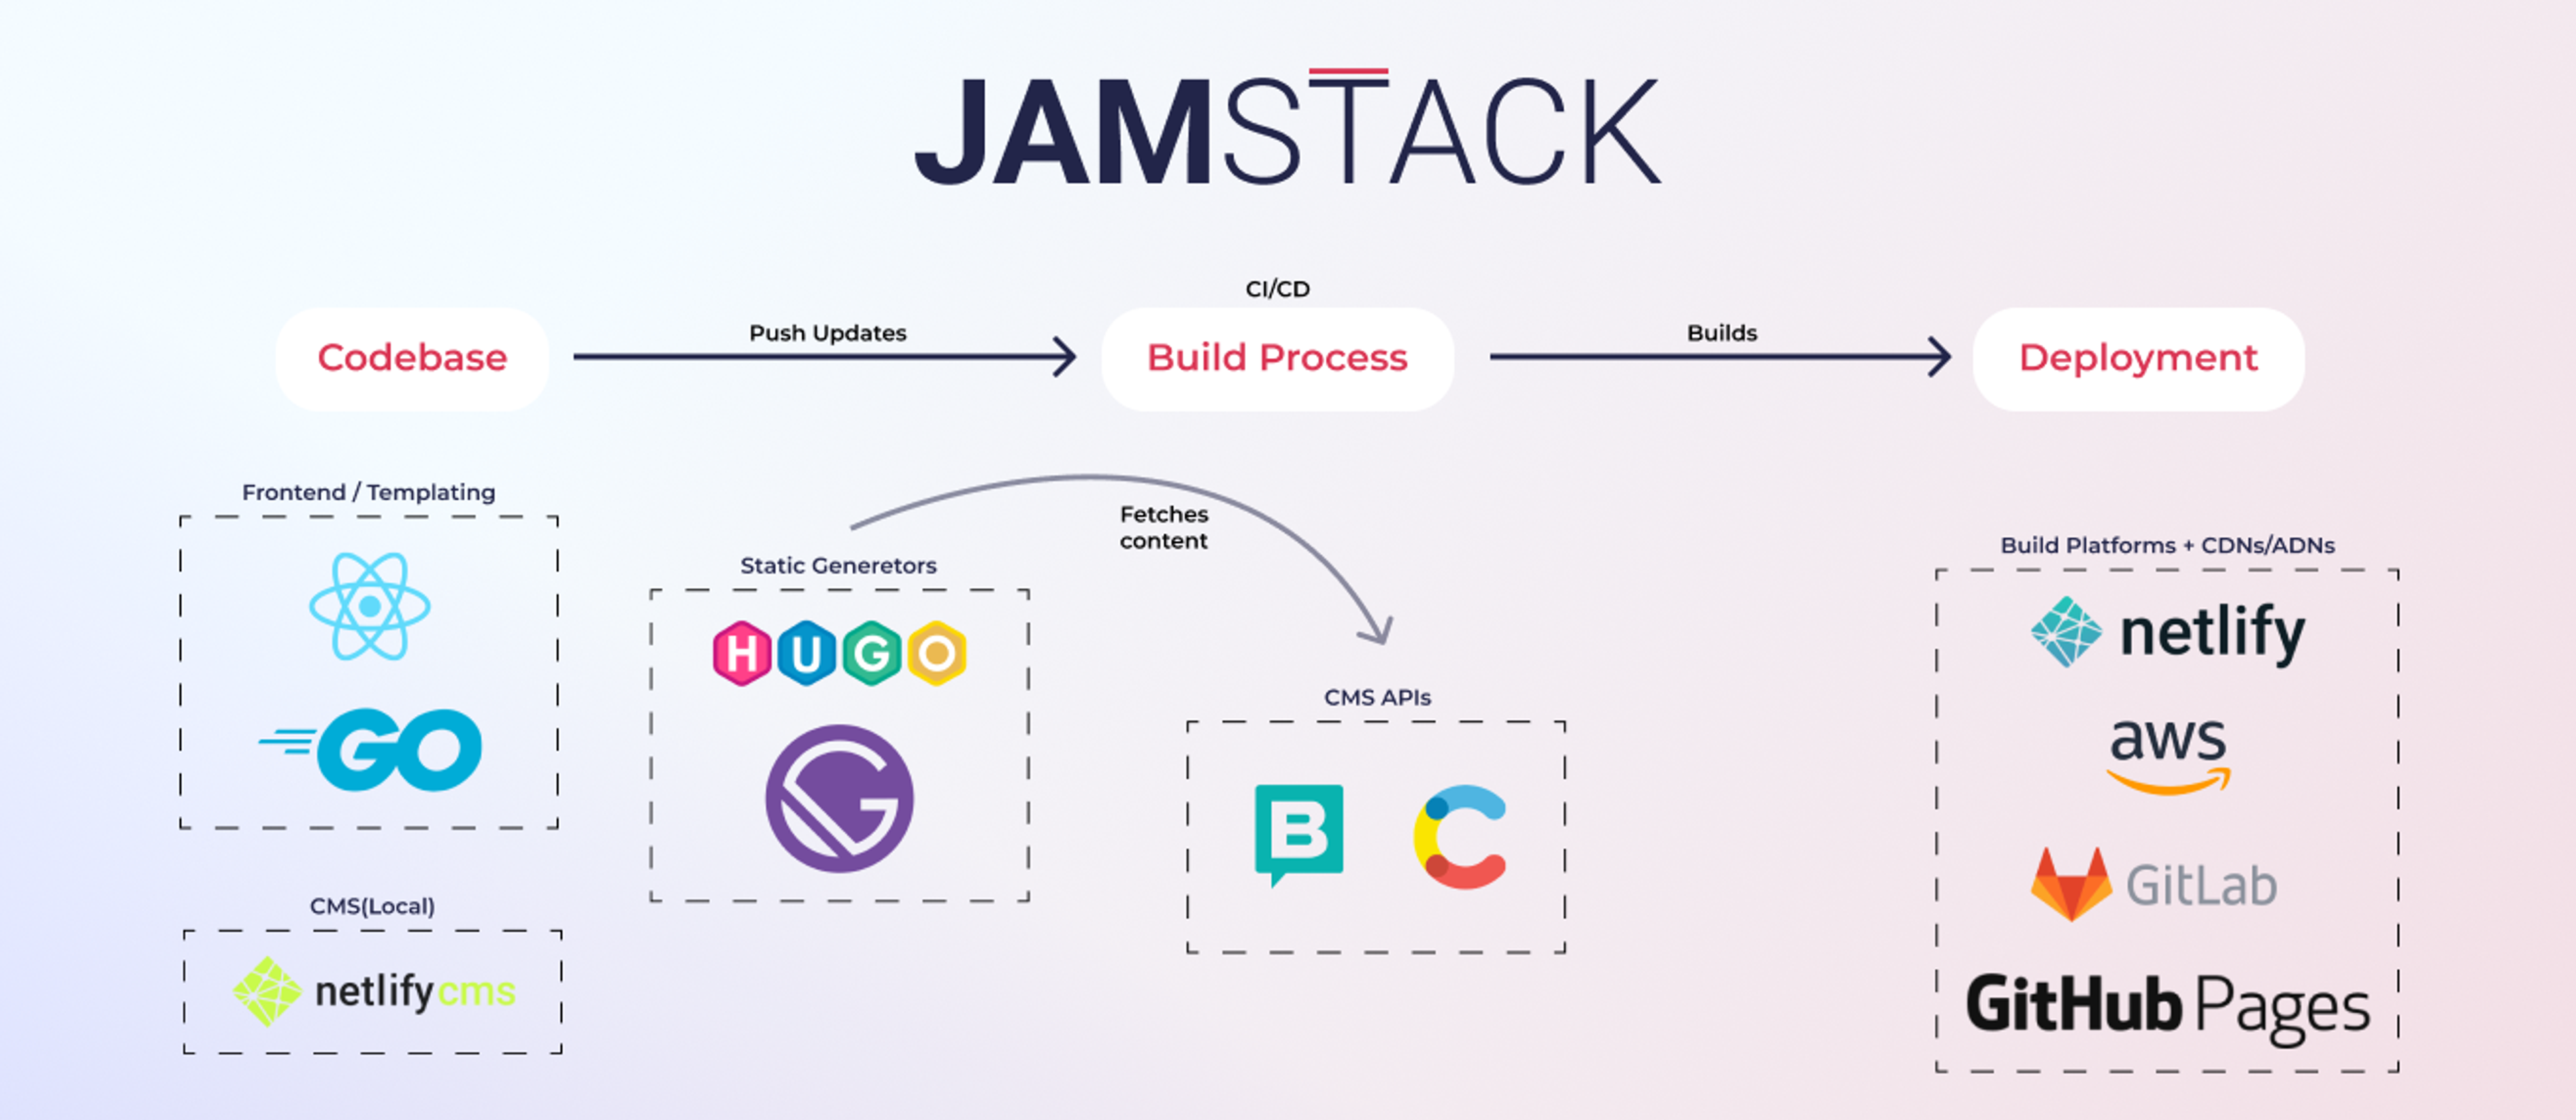 How JAMstack architecture works(Workflow)